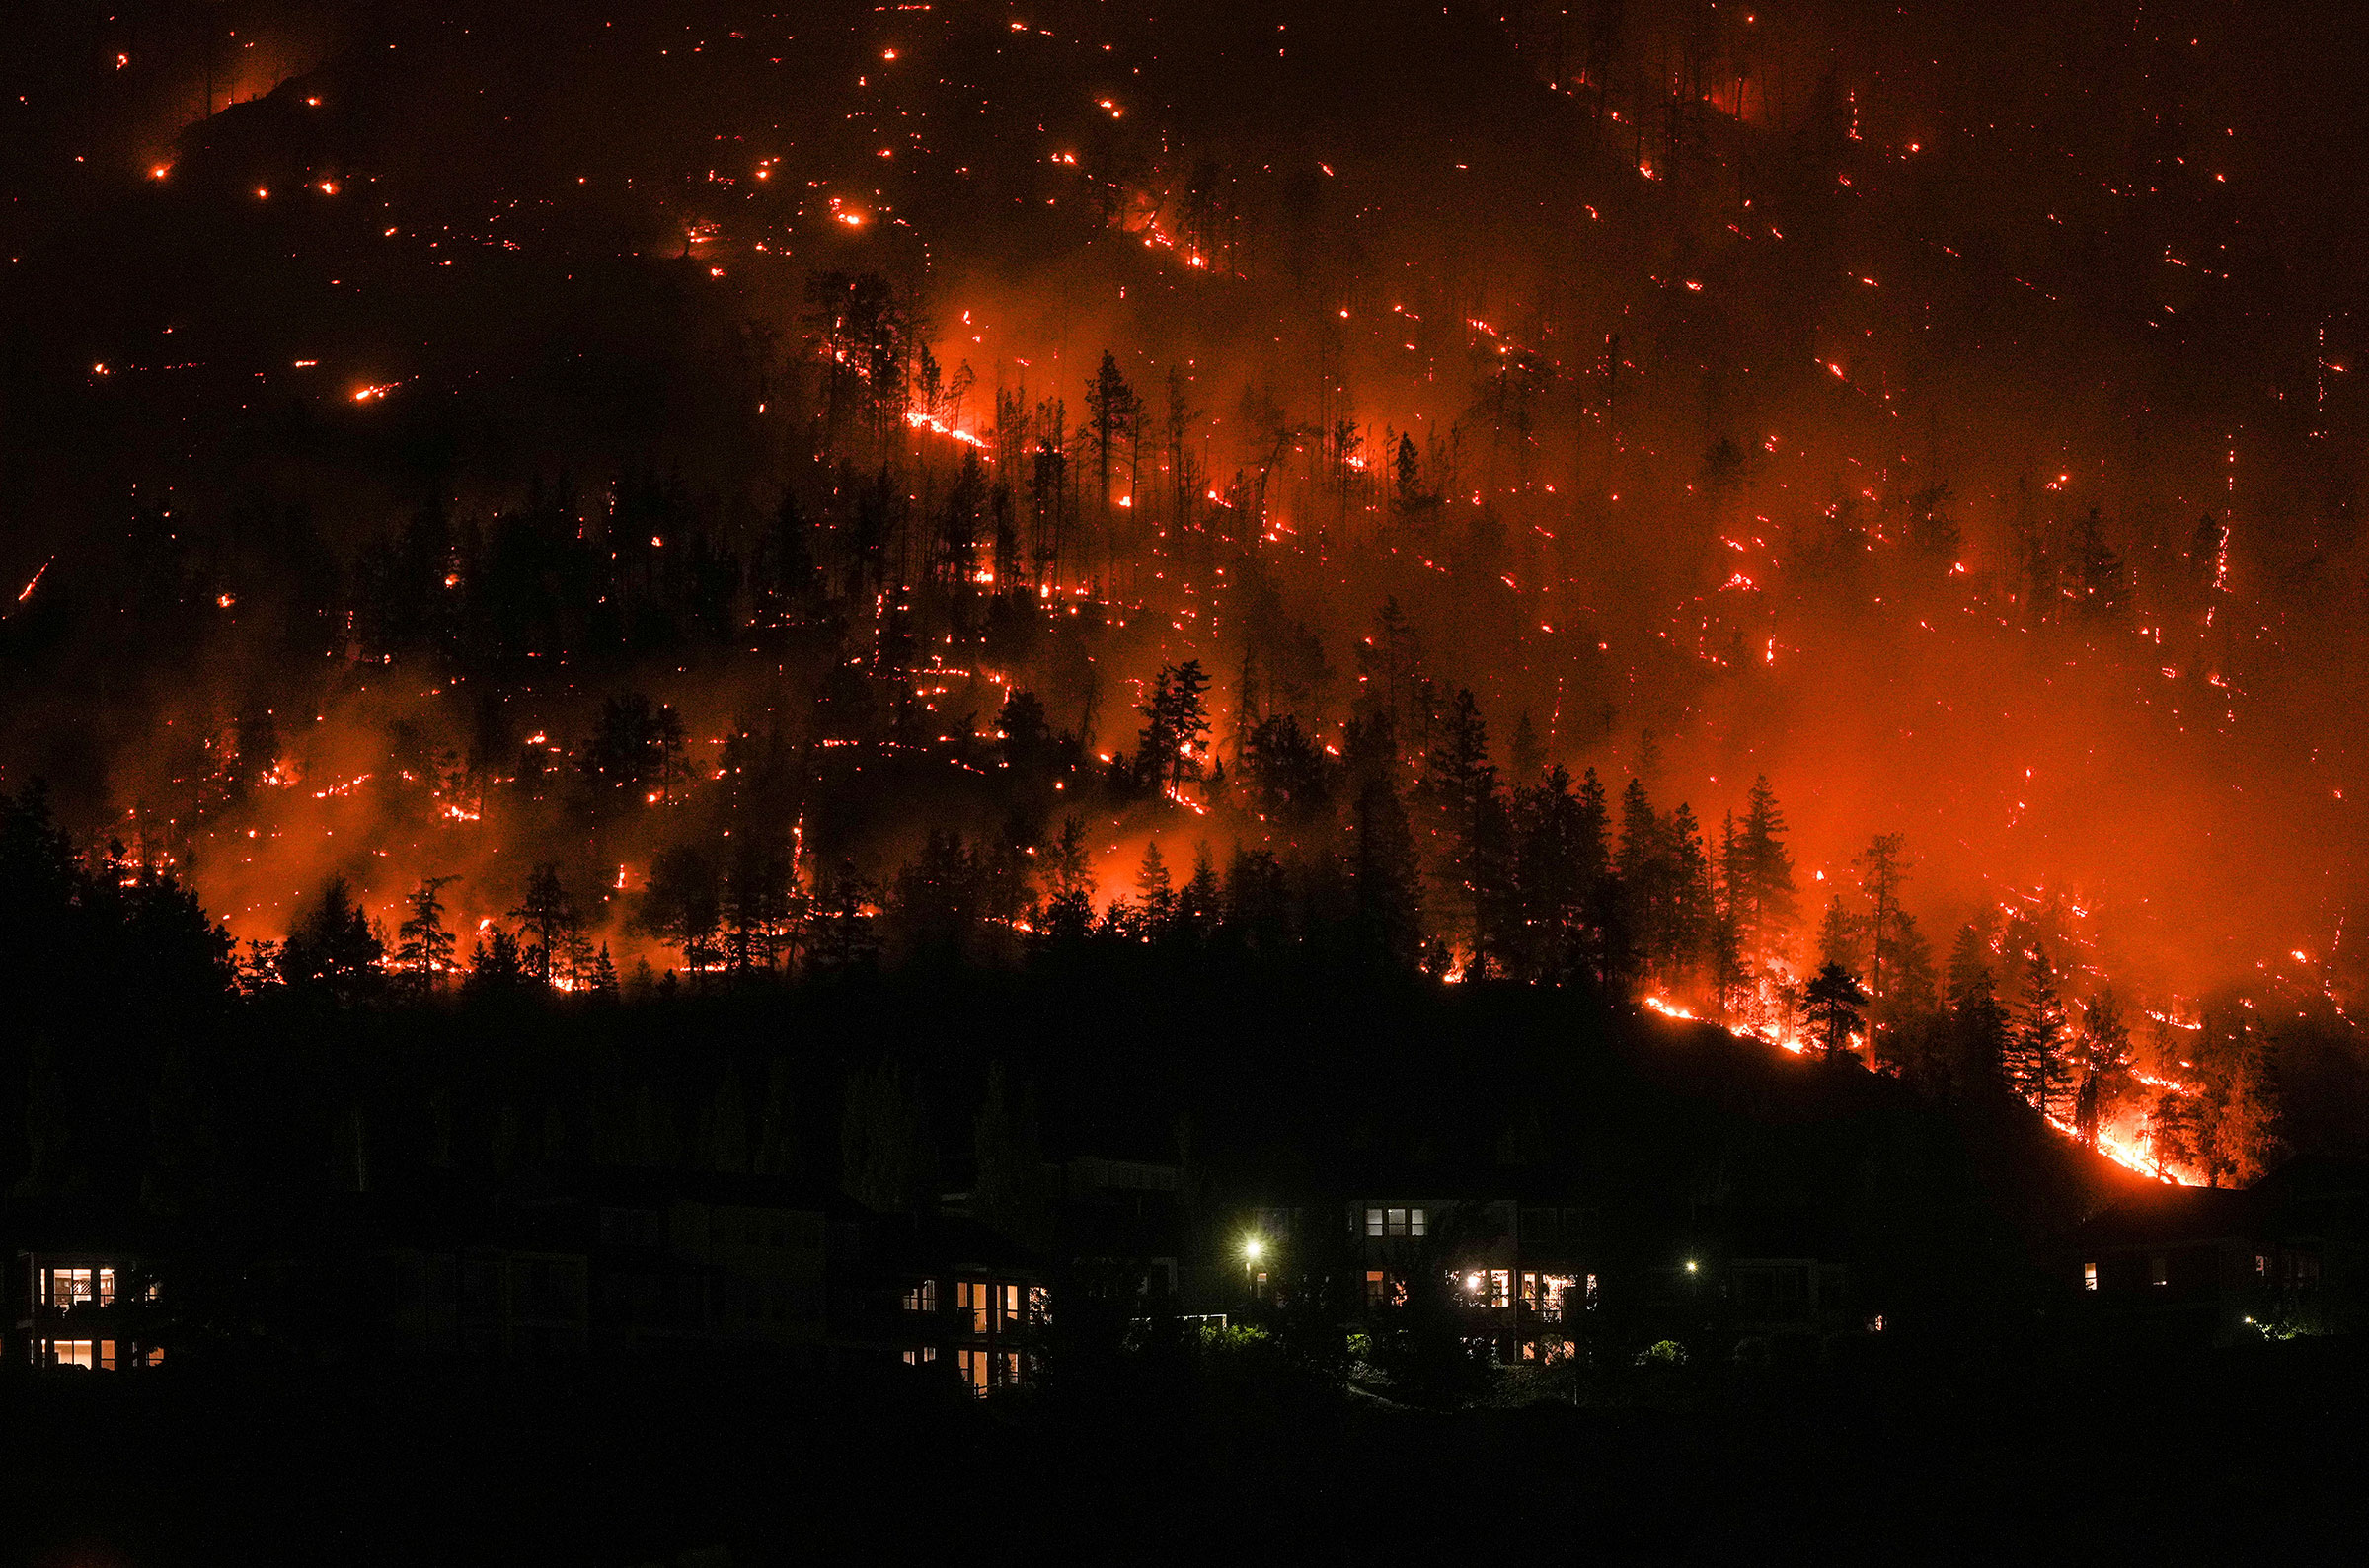 The McDougall Creek wildfire burns on the mountainside above houses in West Kelowna, B.C., on Aug. 18.